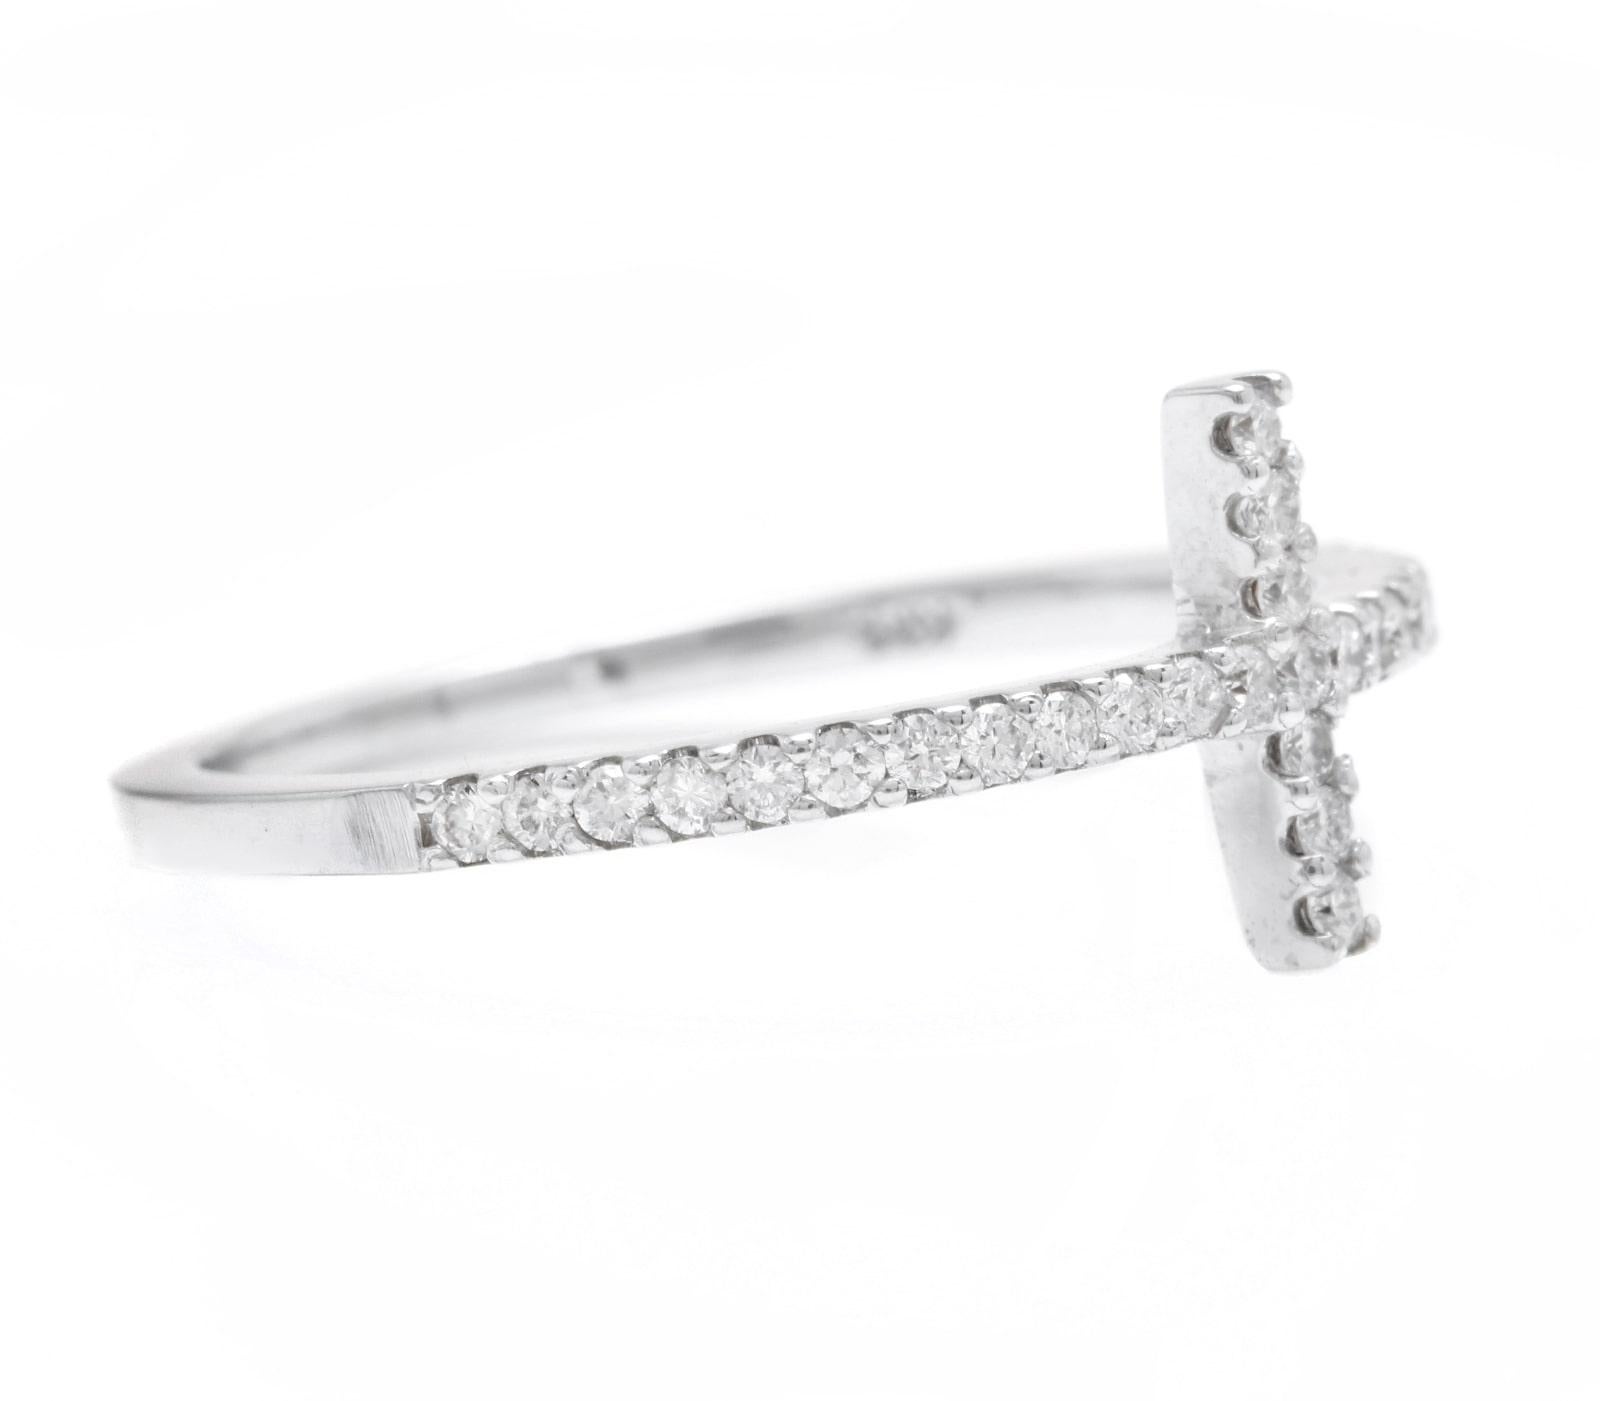 Fine 0.25 Carats Natural Diamond 14K Solid White Gold Cross Ring

Suggested Replacement Value: Approx. $1,400.00

Stamped: 14K

Total Natural Round Cut Diamonds Weight: Approx. 0.25 Carats (color G-H / Clarity SI1-SI2)

The width of the cross band